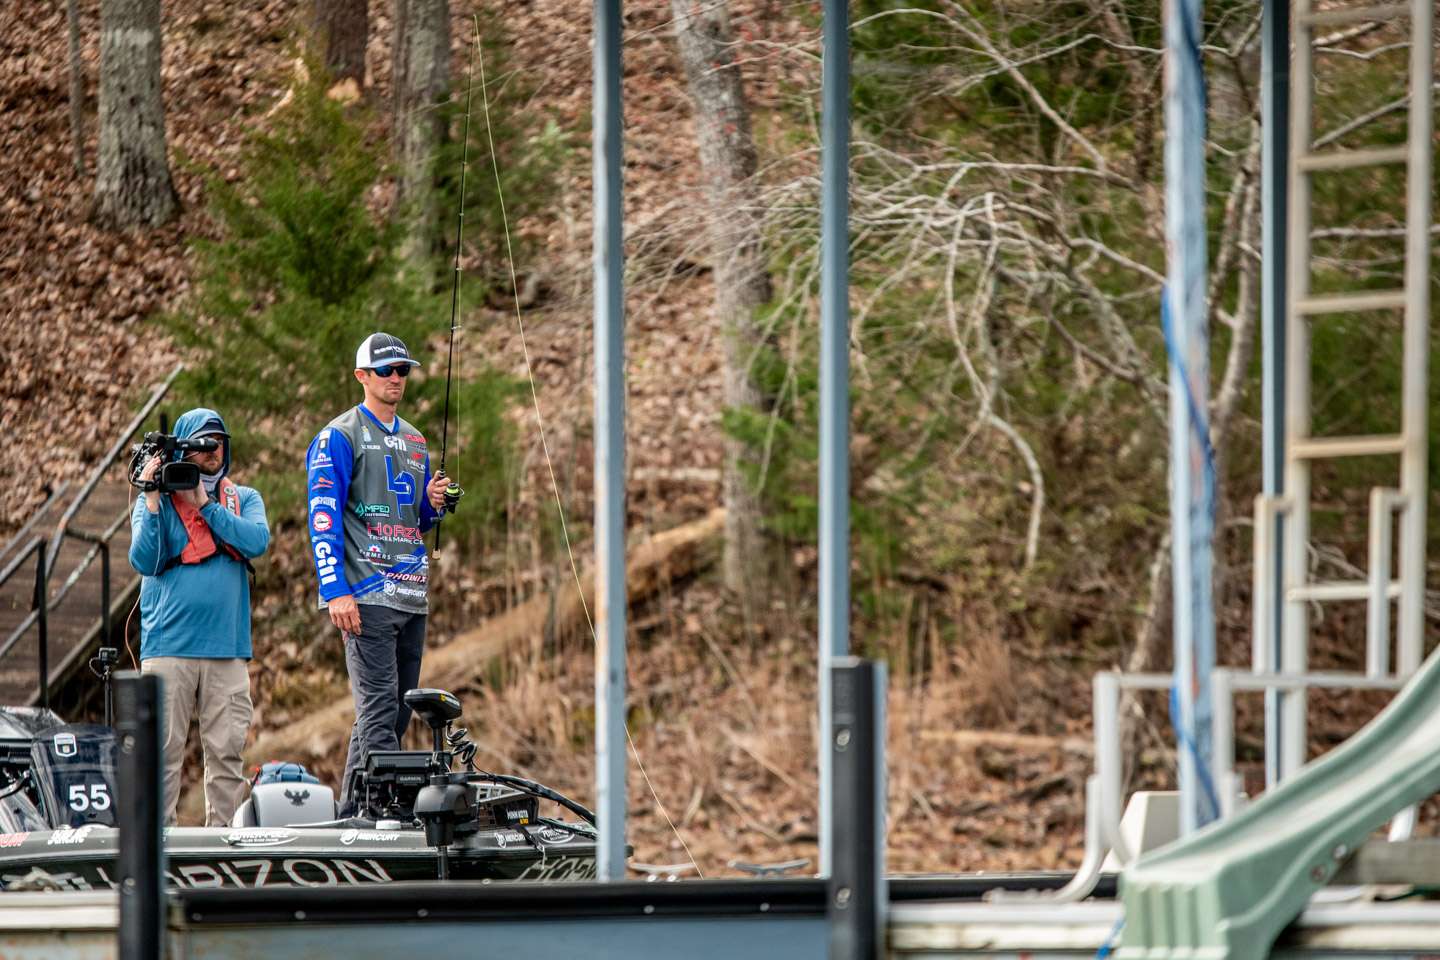 Palmer is fishing with a finesse set up, using a wacky rig to fish the docks.
